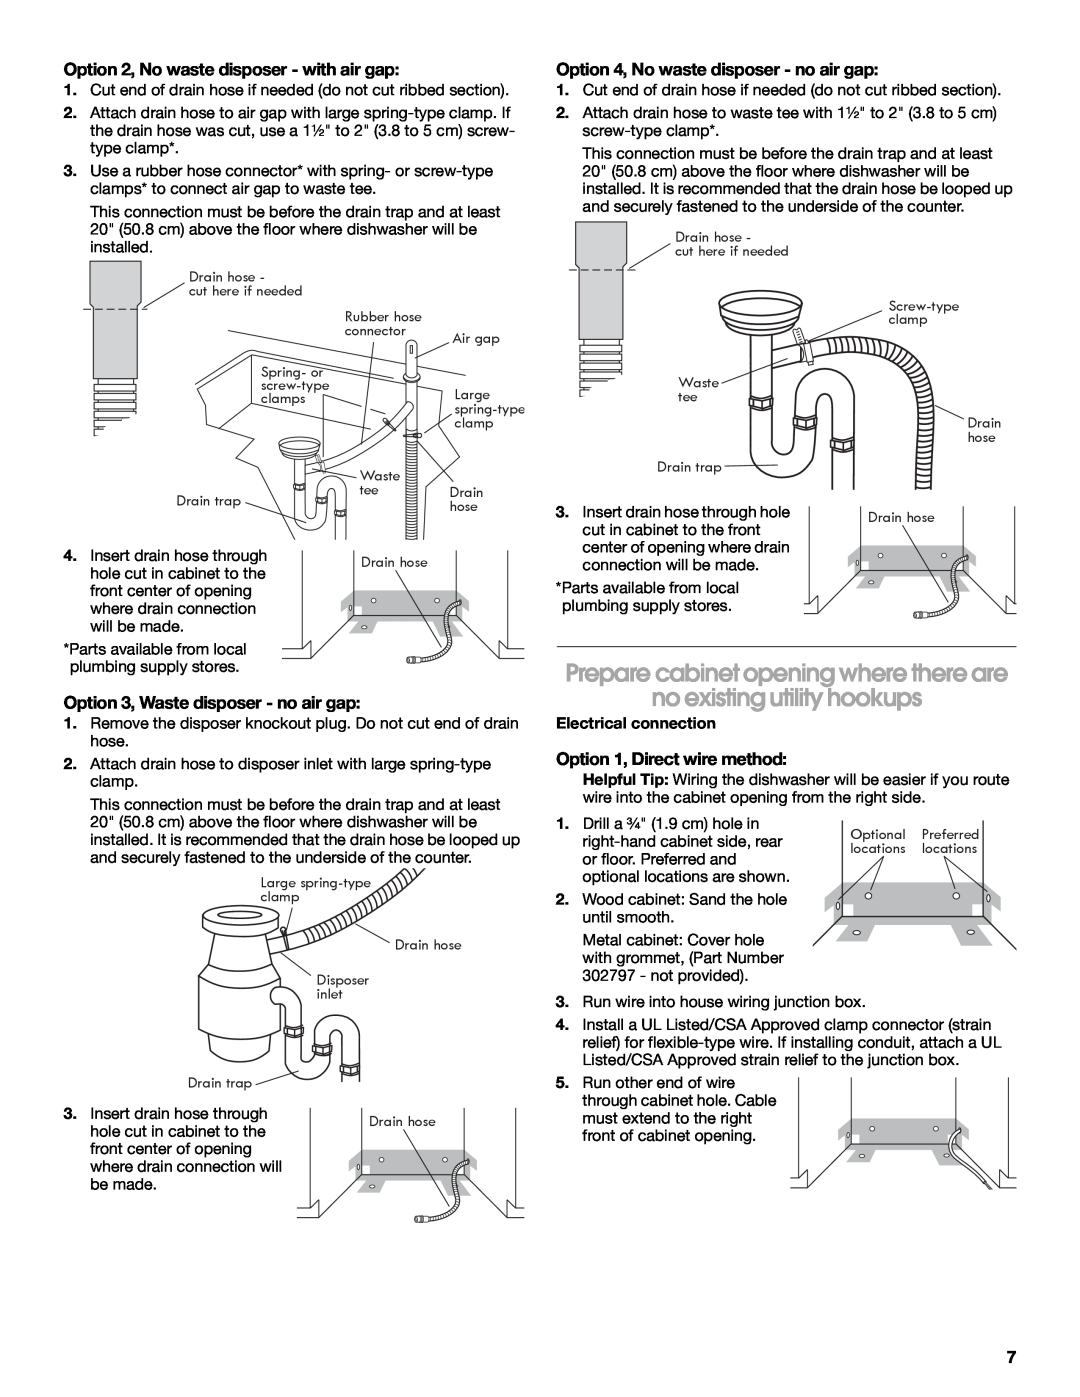 Whirlpool W10282559A Prepare cabinet opening where there are, no existing utility hookups, Option 1, Direct wire method 